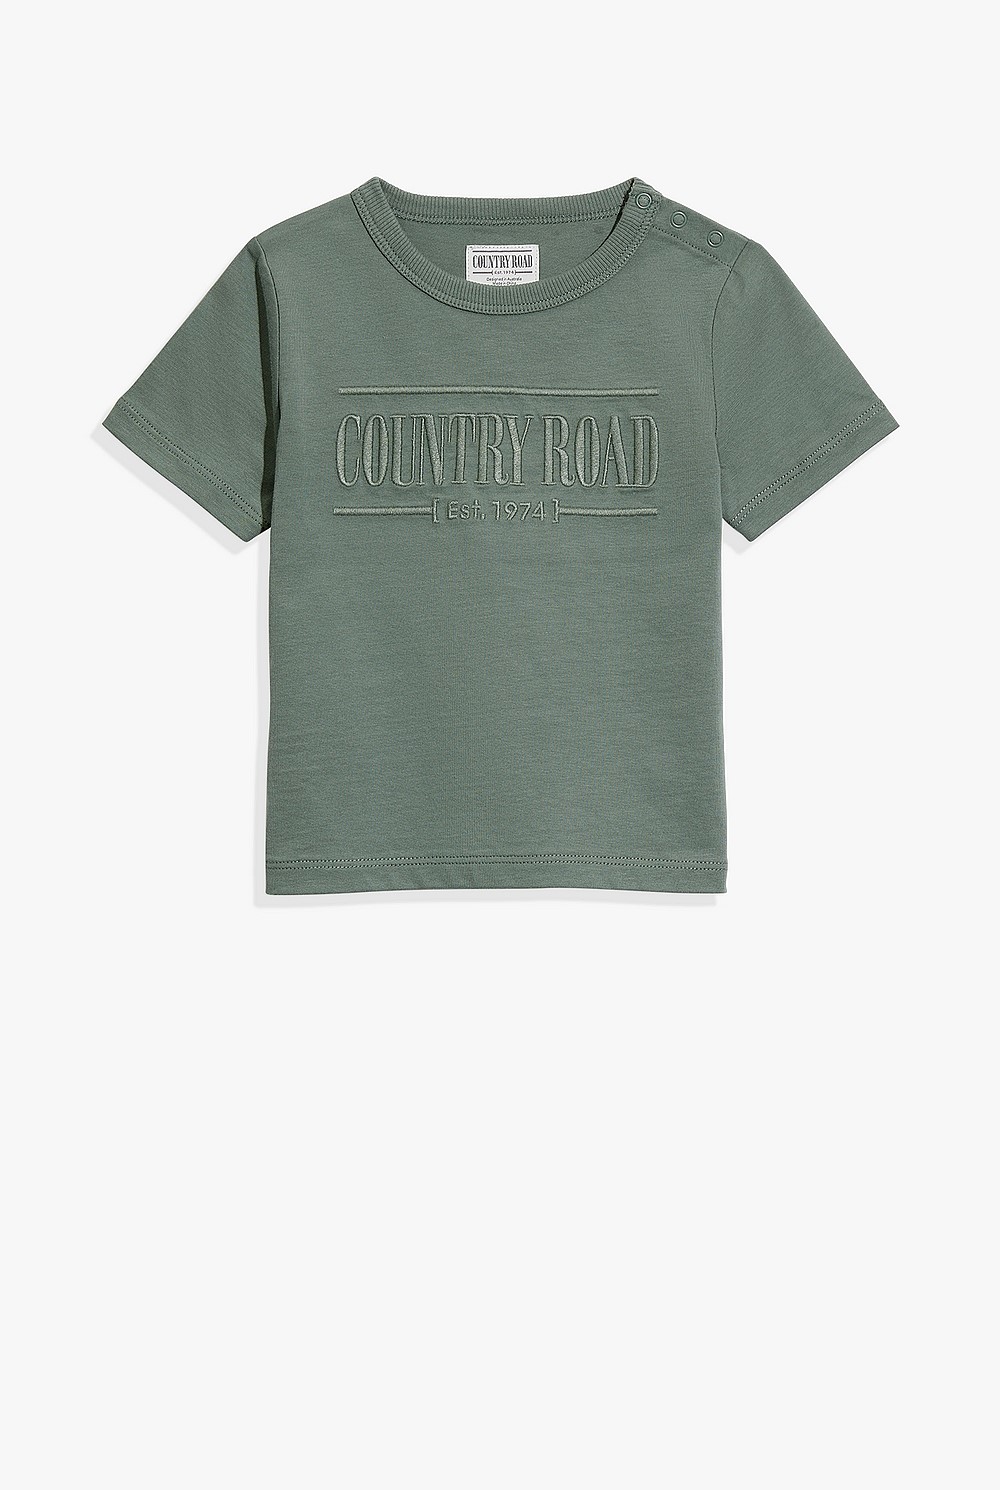 Country Road - Sage Hertiage T-shirt